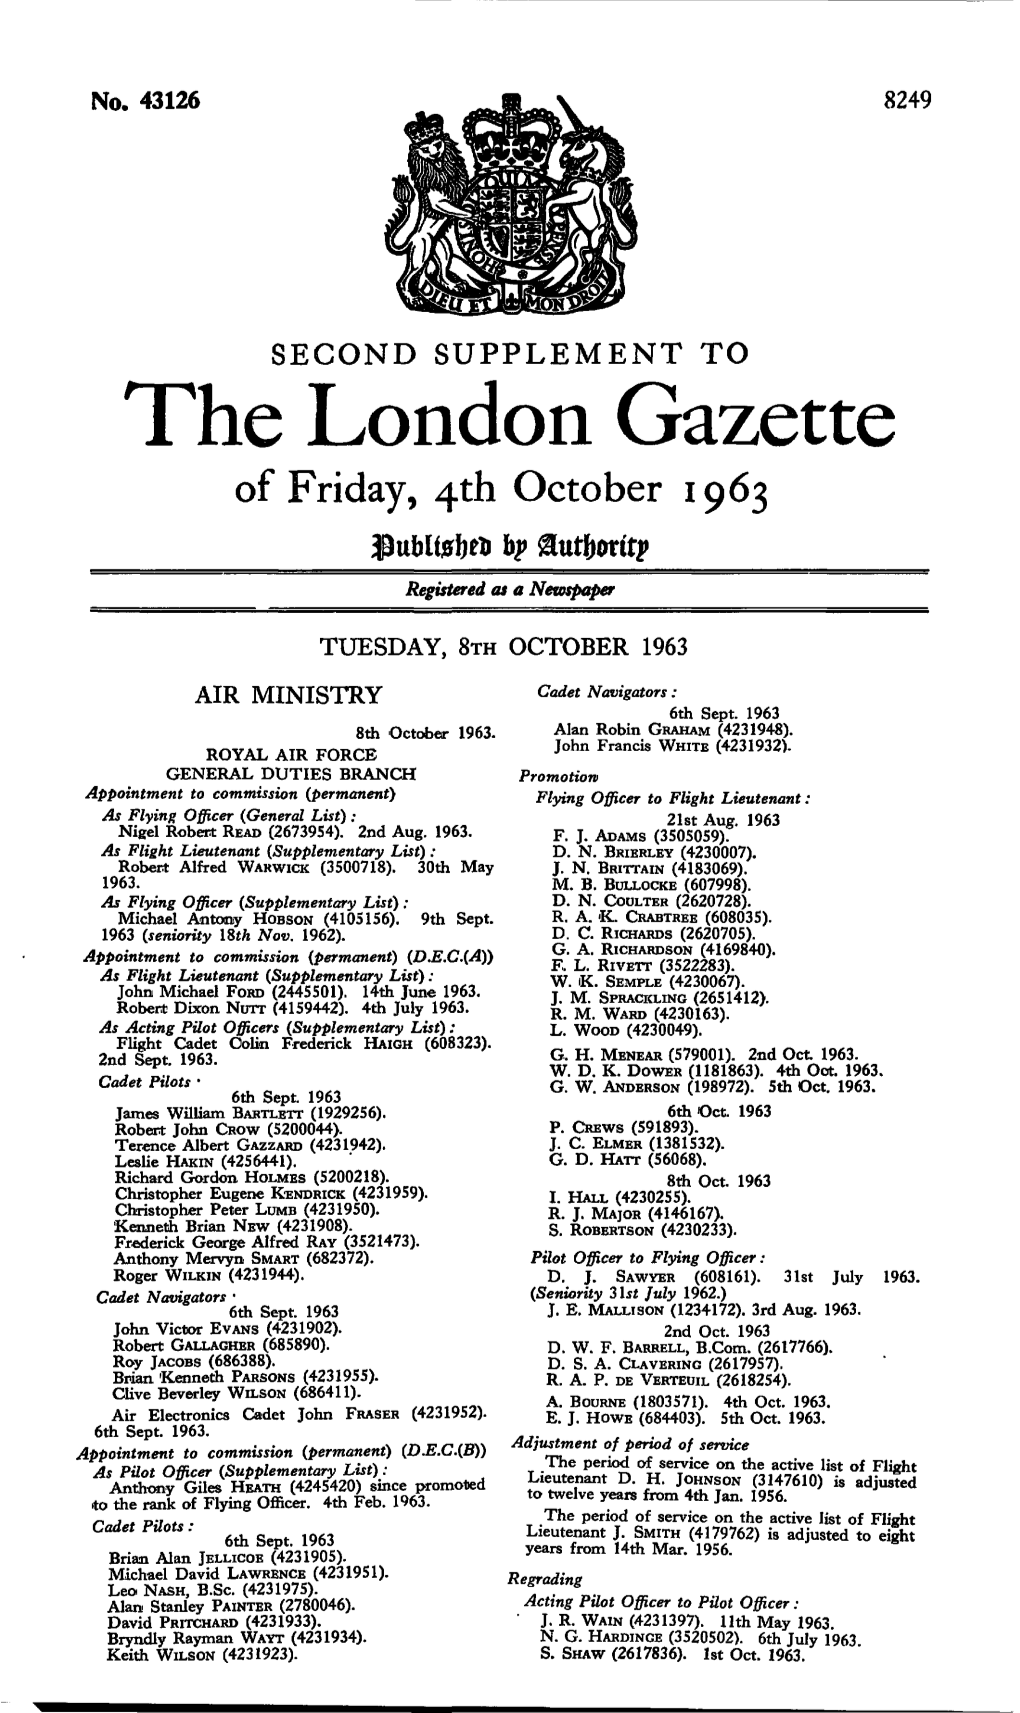 The London Gazette of Friday, 4Th October 1963